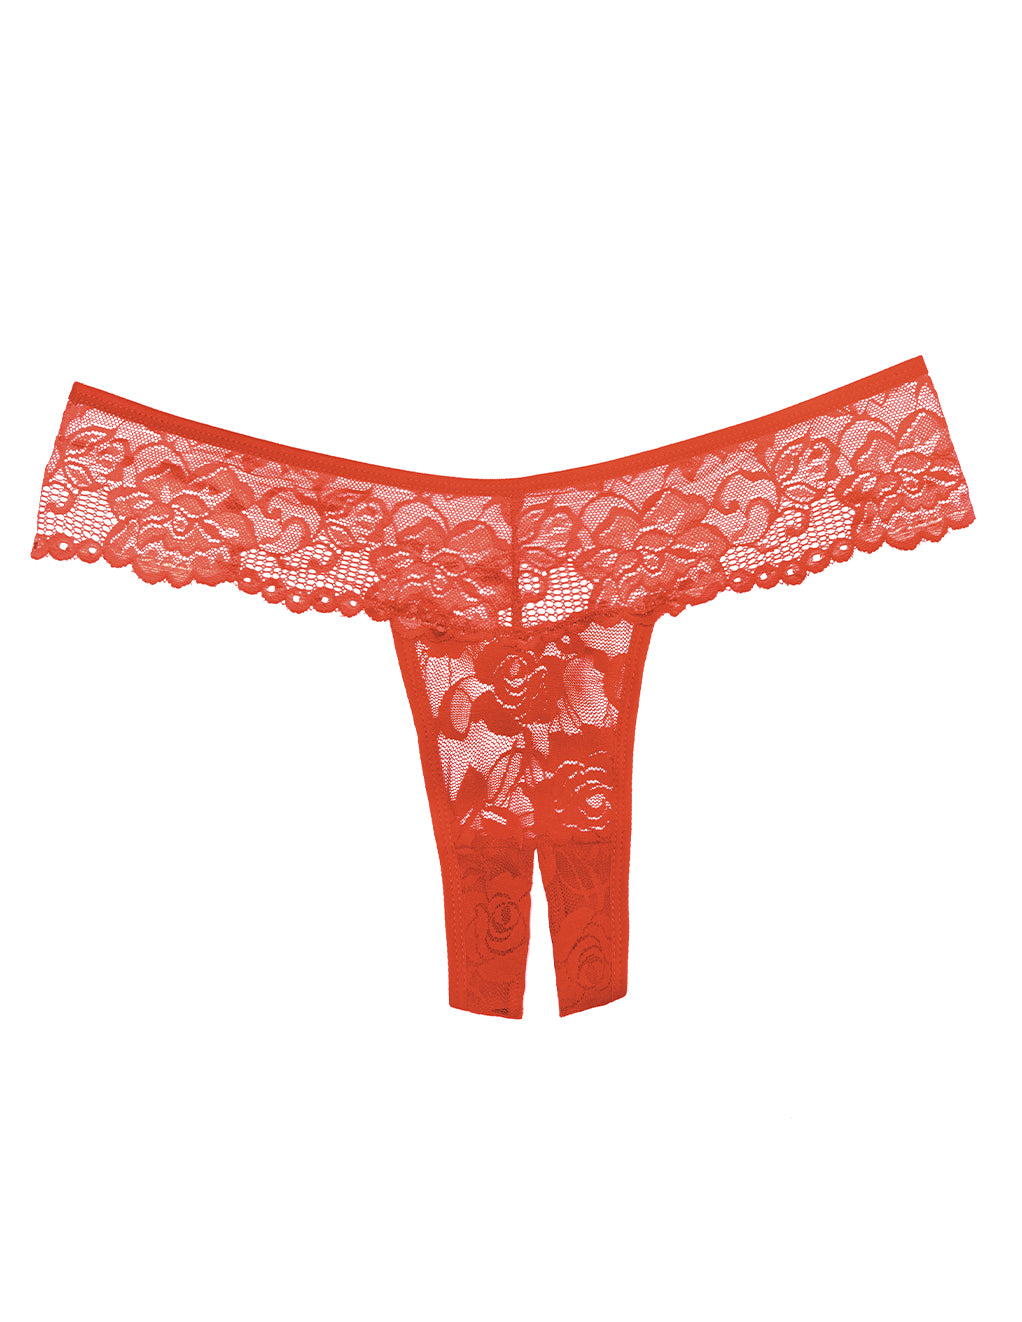 Allure Lingerie Crotchless Lace Thong- Red- Front